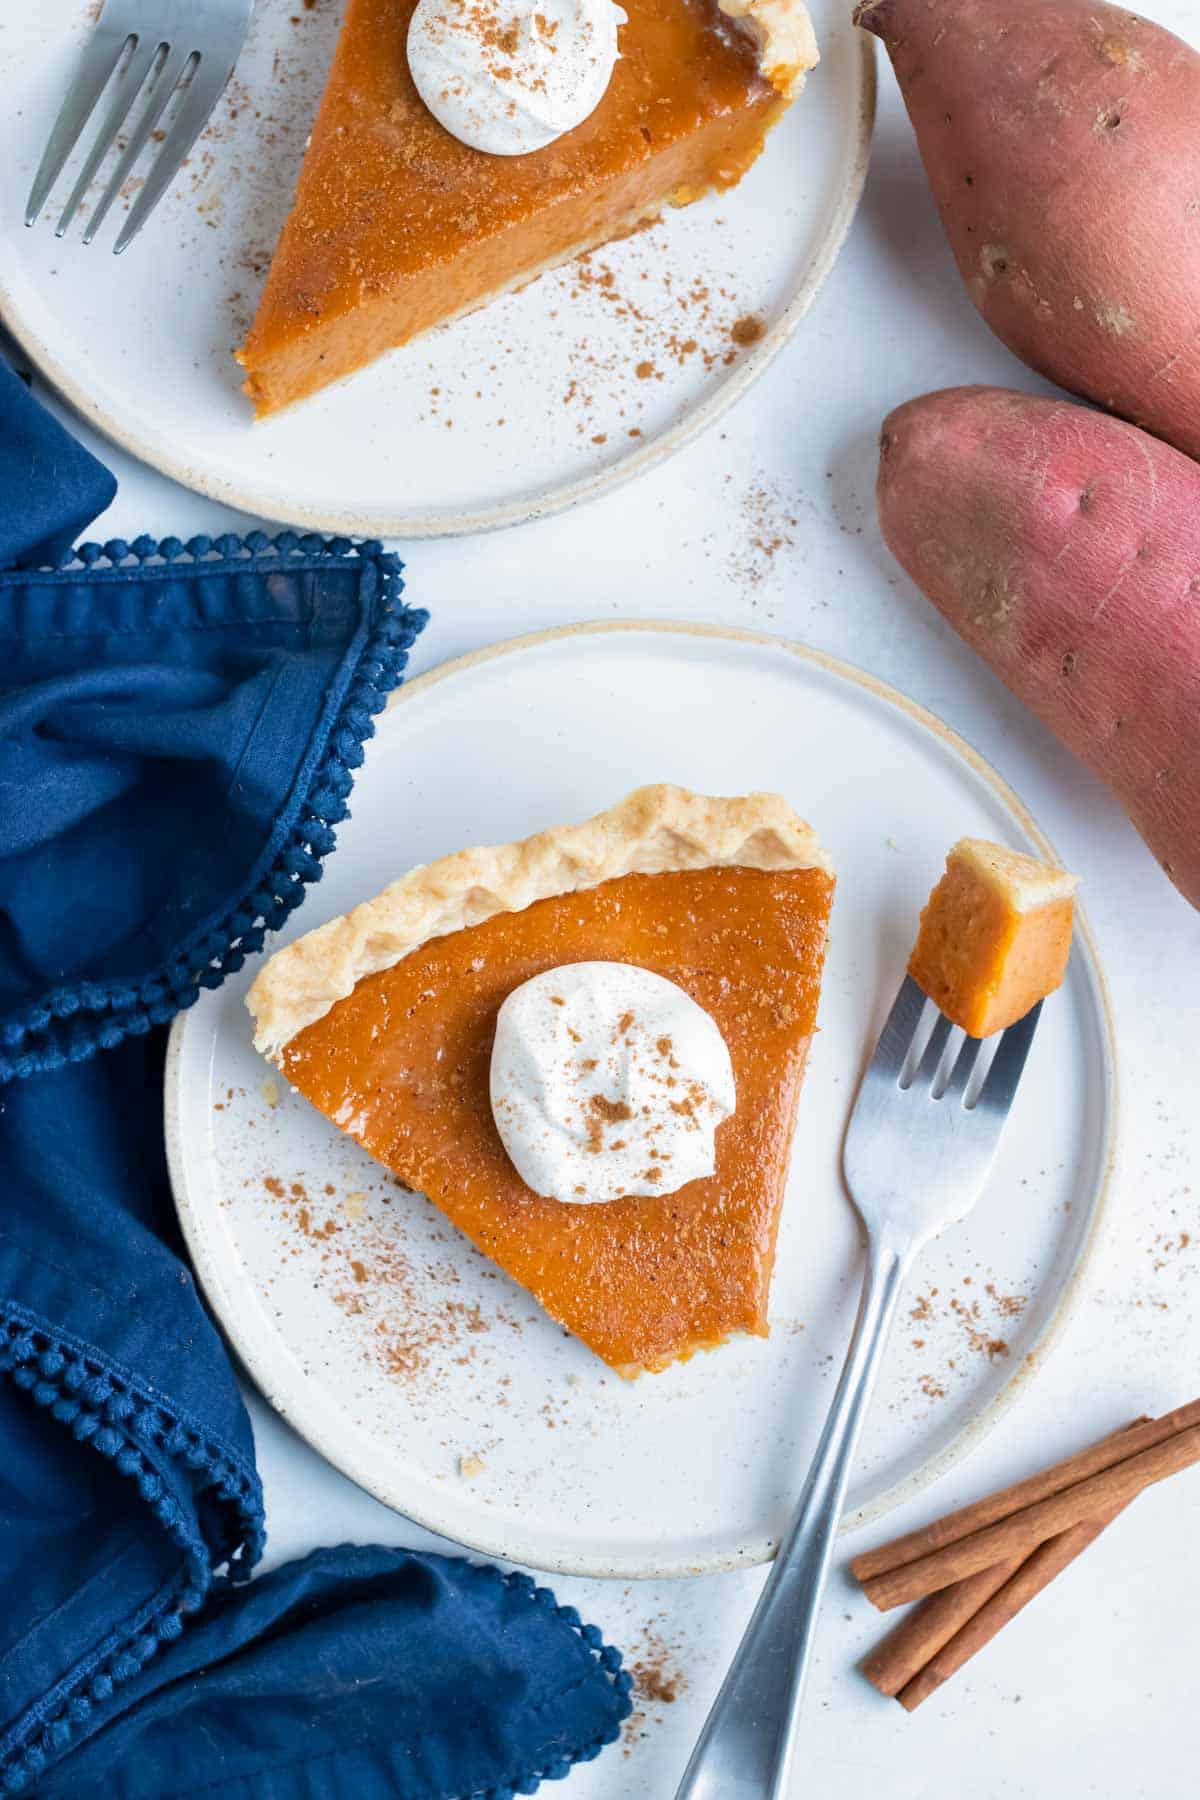 Sweet potato pie is cut into slices and served on white plates for Thanksgiving.